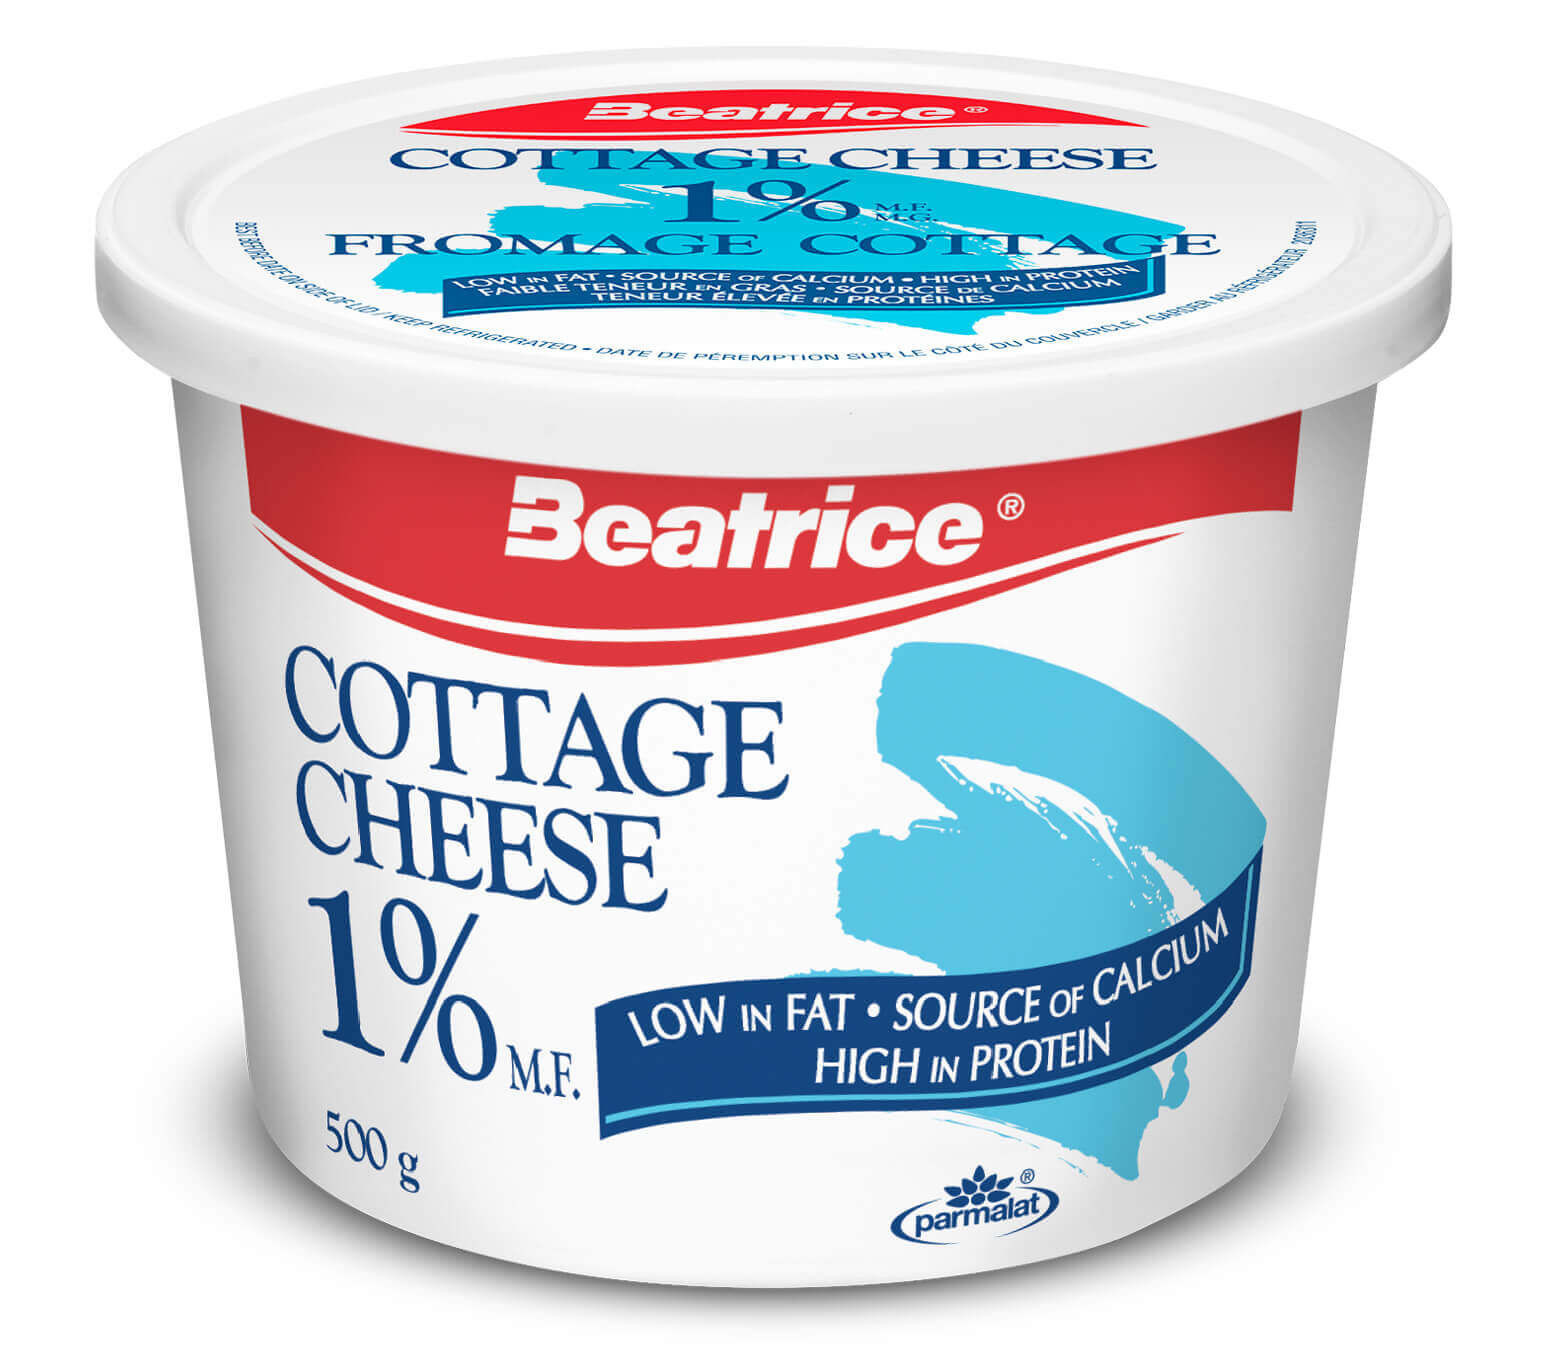 Beatrice 1% cottage cheese  2 x 500g  